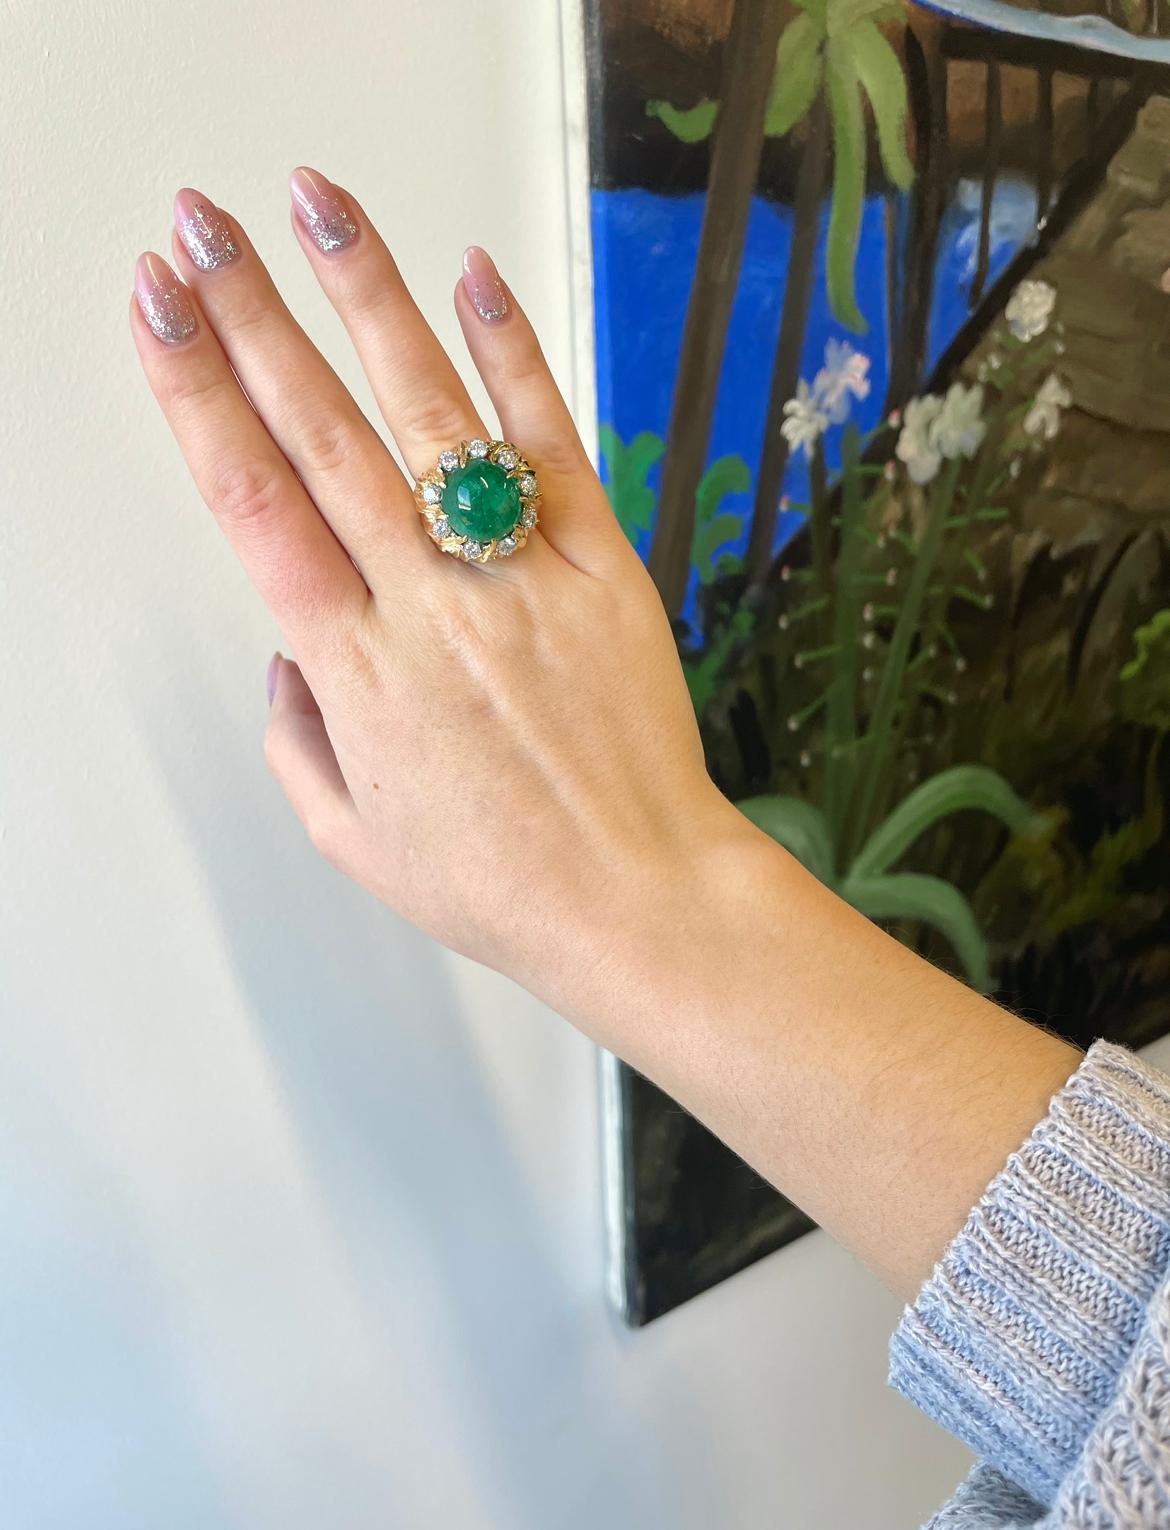 A cocktail ring to remember! This futuristic Retro Emerald Diamond 18k Gold Dome Ring is the epitome of nature. Emerald and diamonds grown in the earth's deposits and a stunning 18k gold band carved to mimic the trunk of the tree. The emerald is a